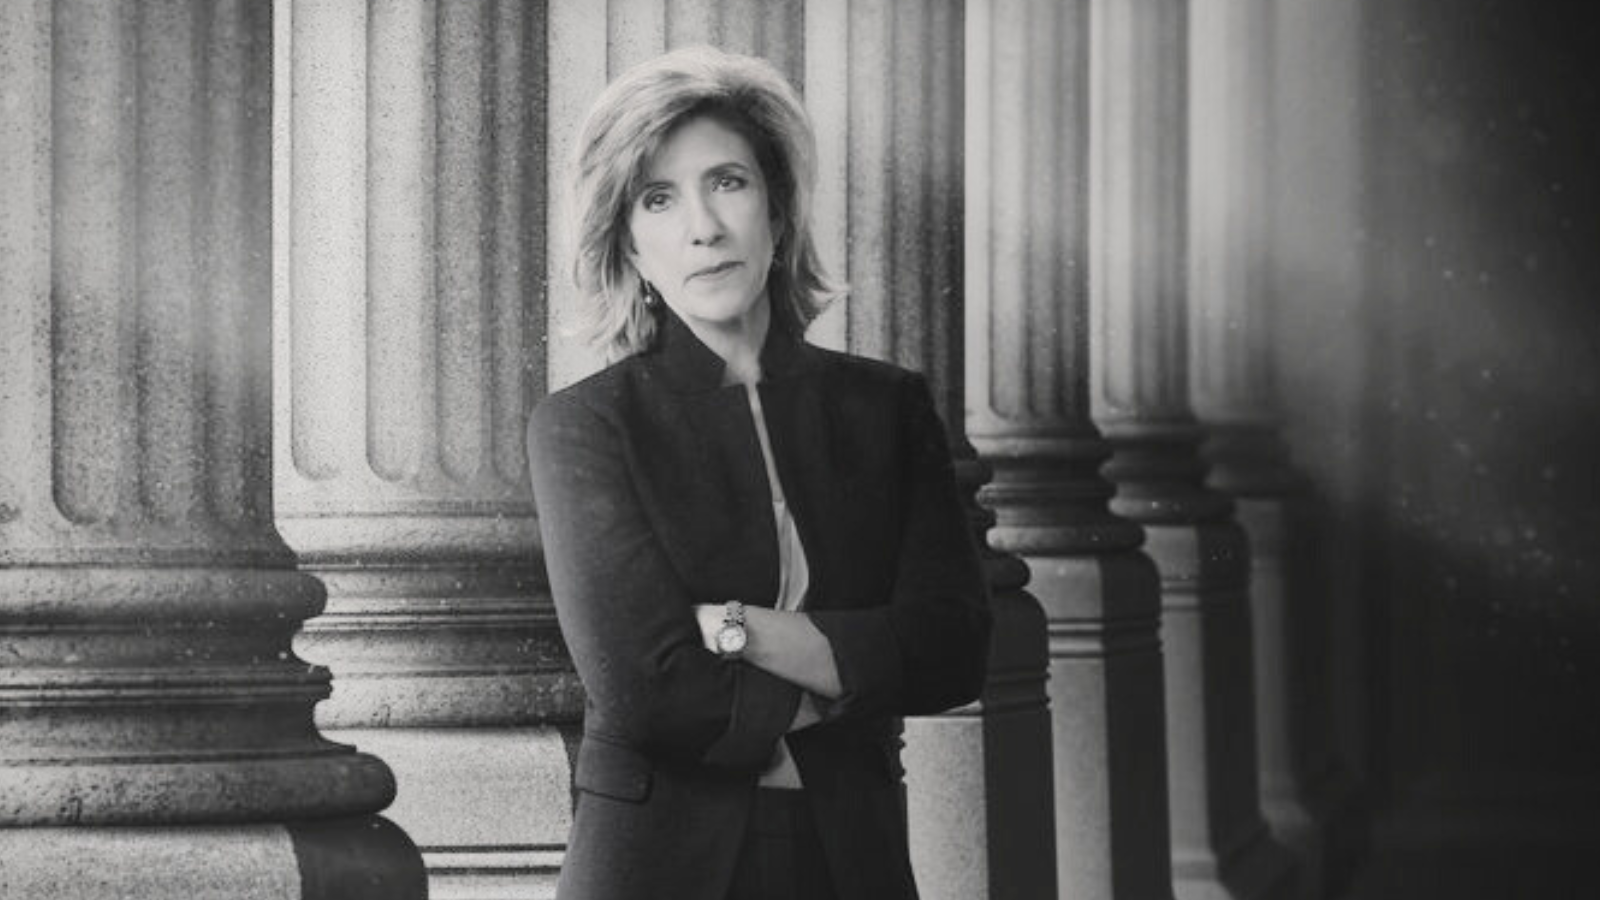 Kelly Siegler, in a suit jacket and pants, stands with her arms crossed in front of columns similar to the kind found outside courthouses. A dramatic black and white film filter was applied to the photo.